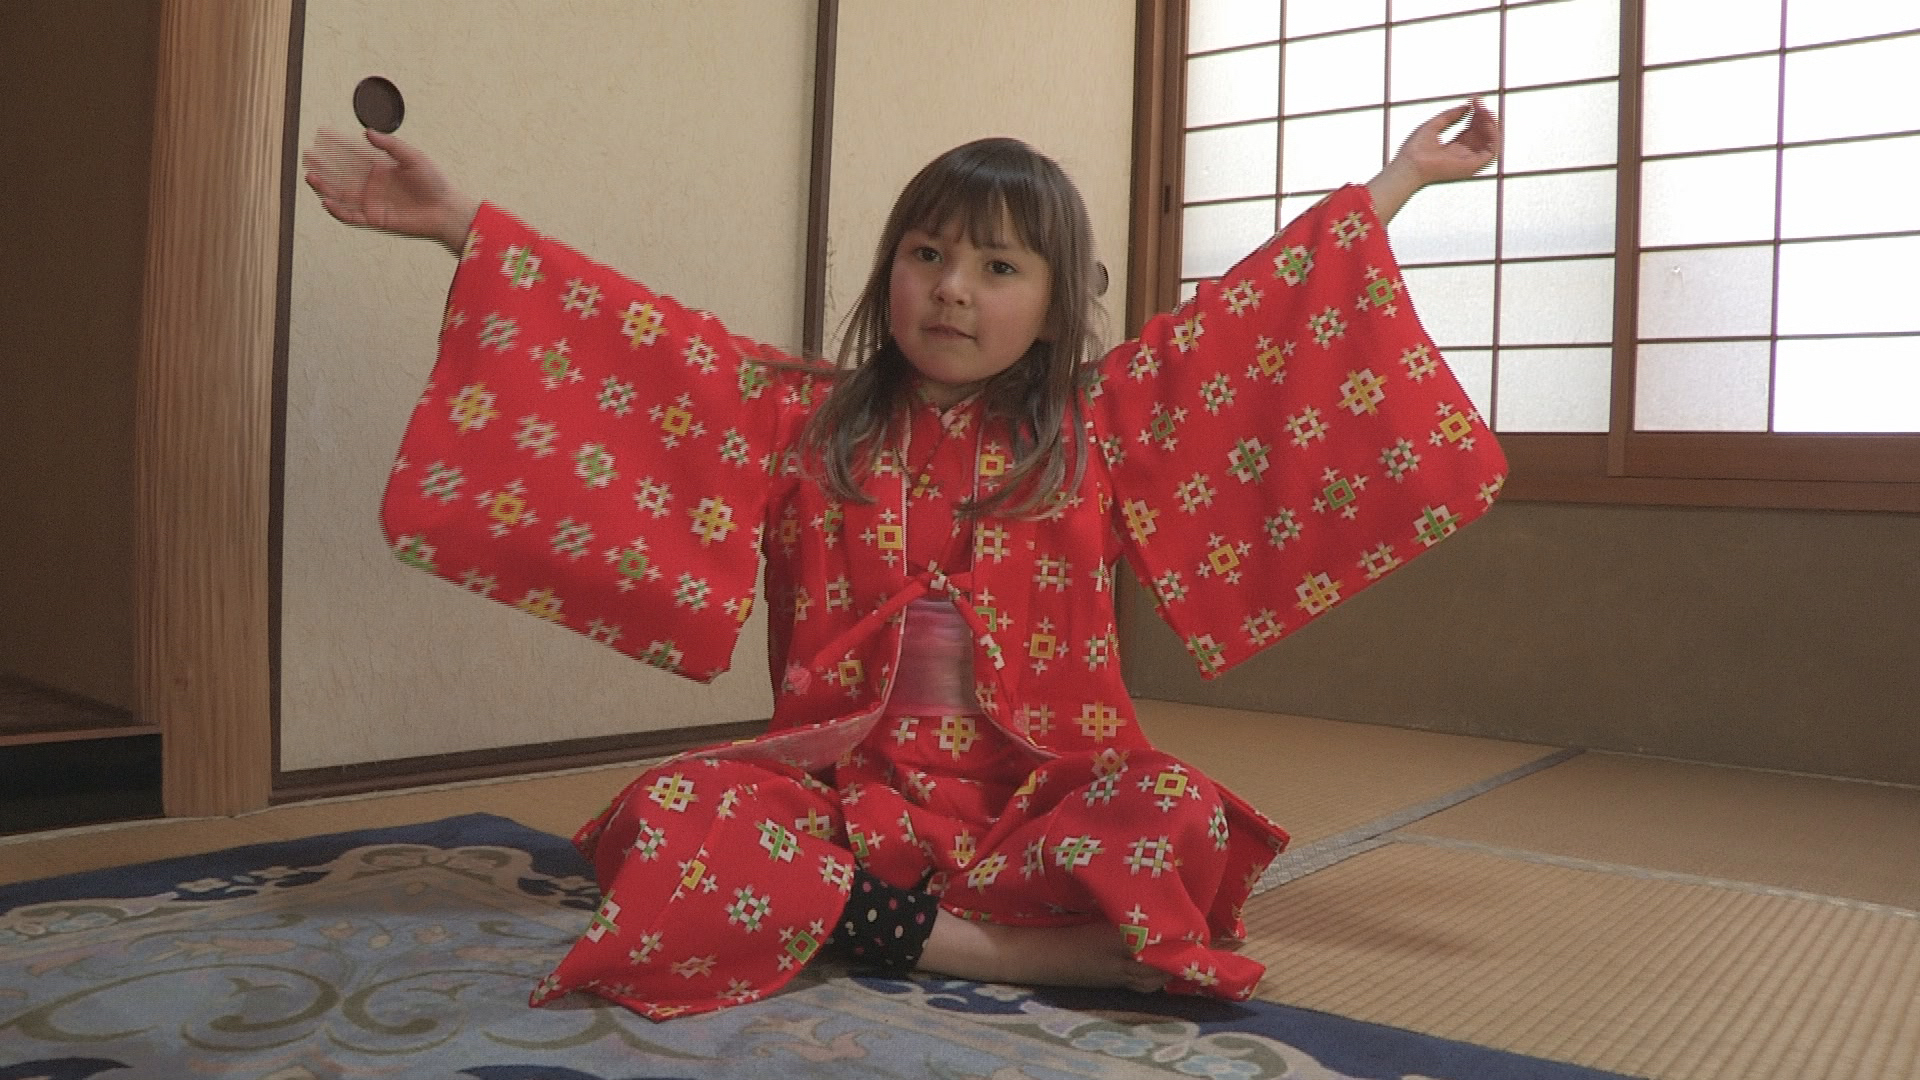 Starring role for Momoko as she learns how to put on a kimono